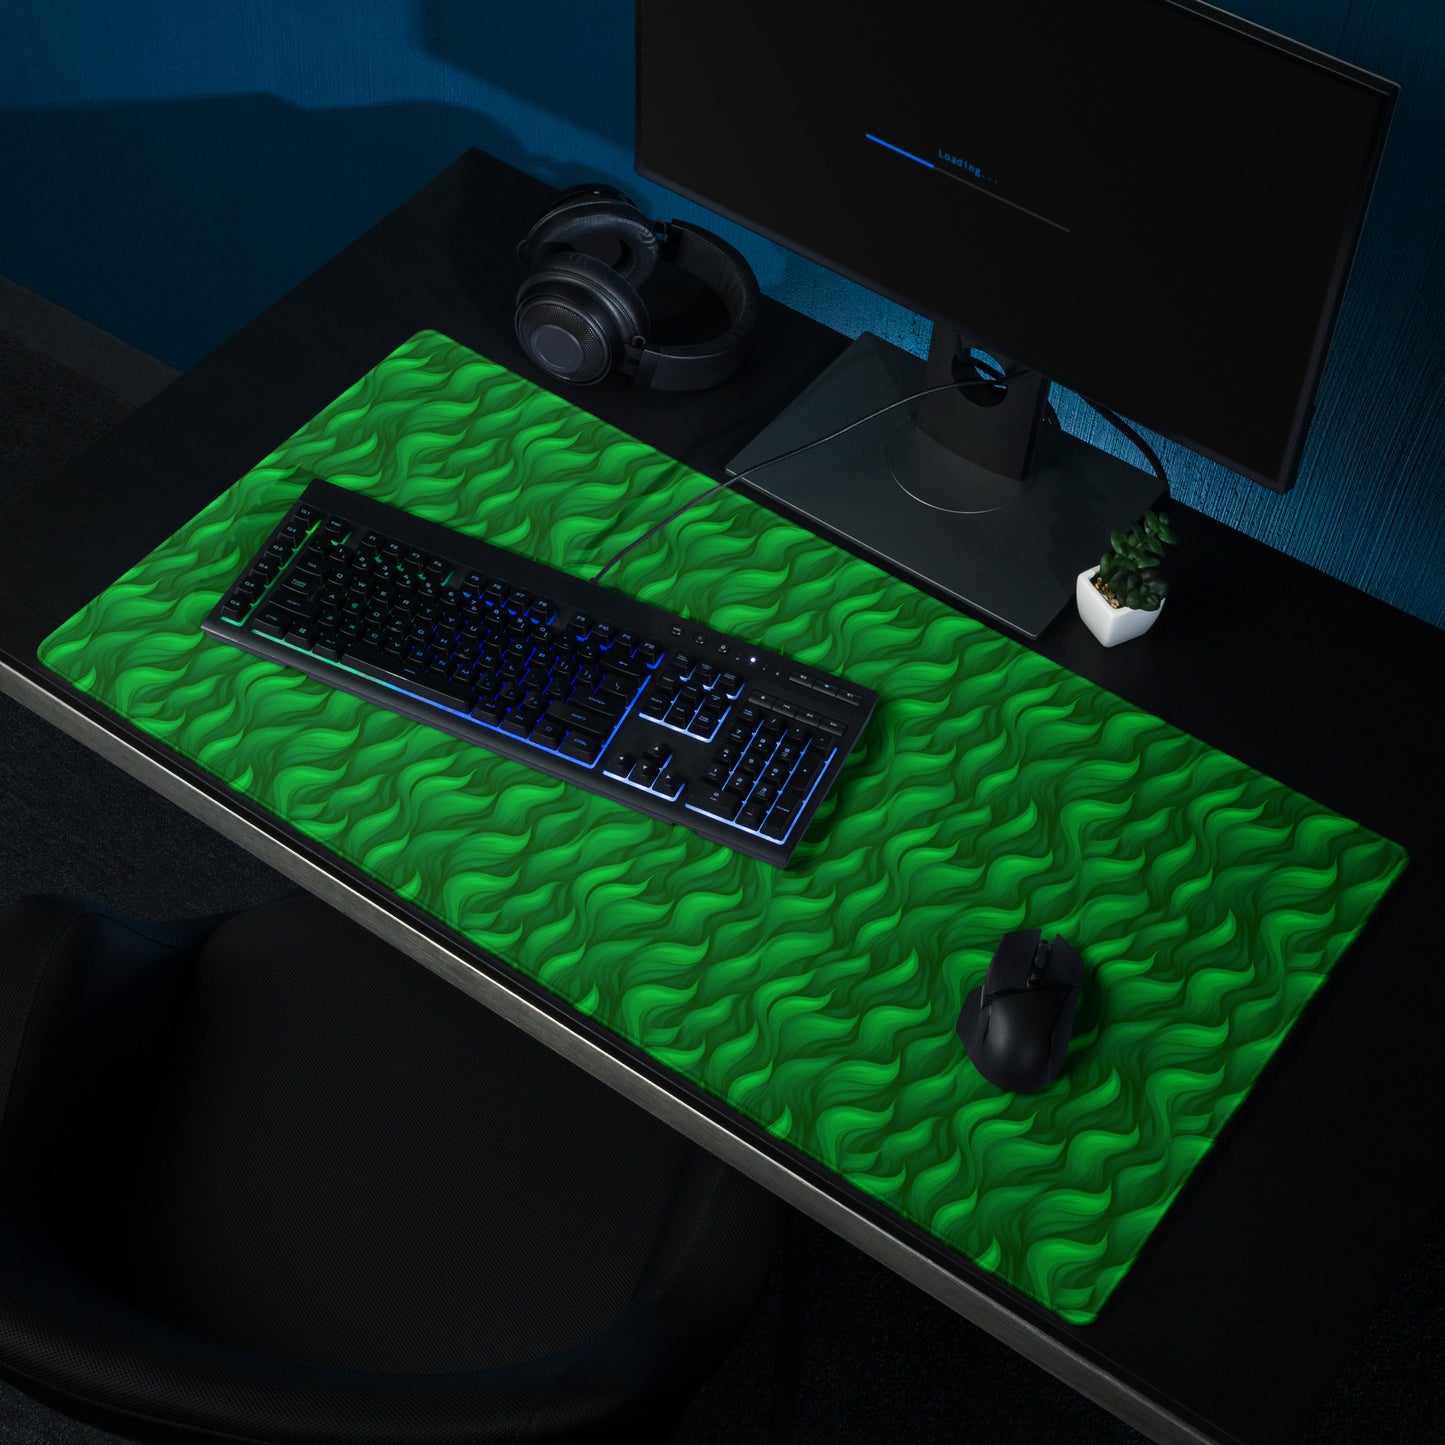 A 36" x 18" desk pad with a wavy flame pattern on it shown on a desk setup. Green in color.